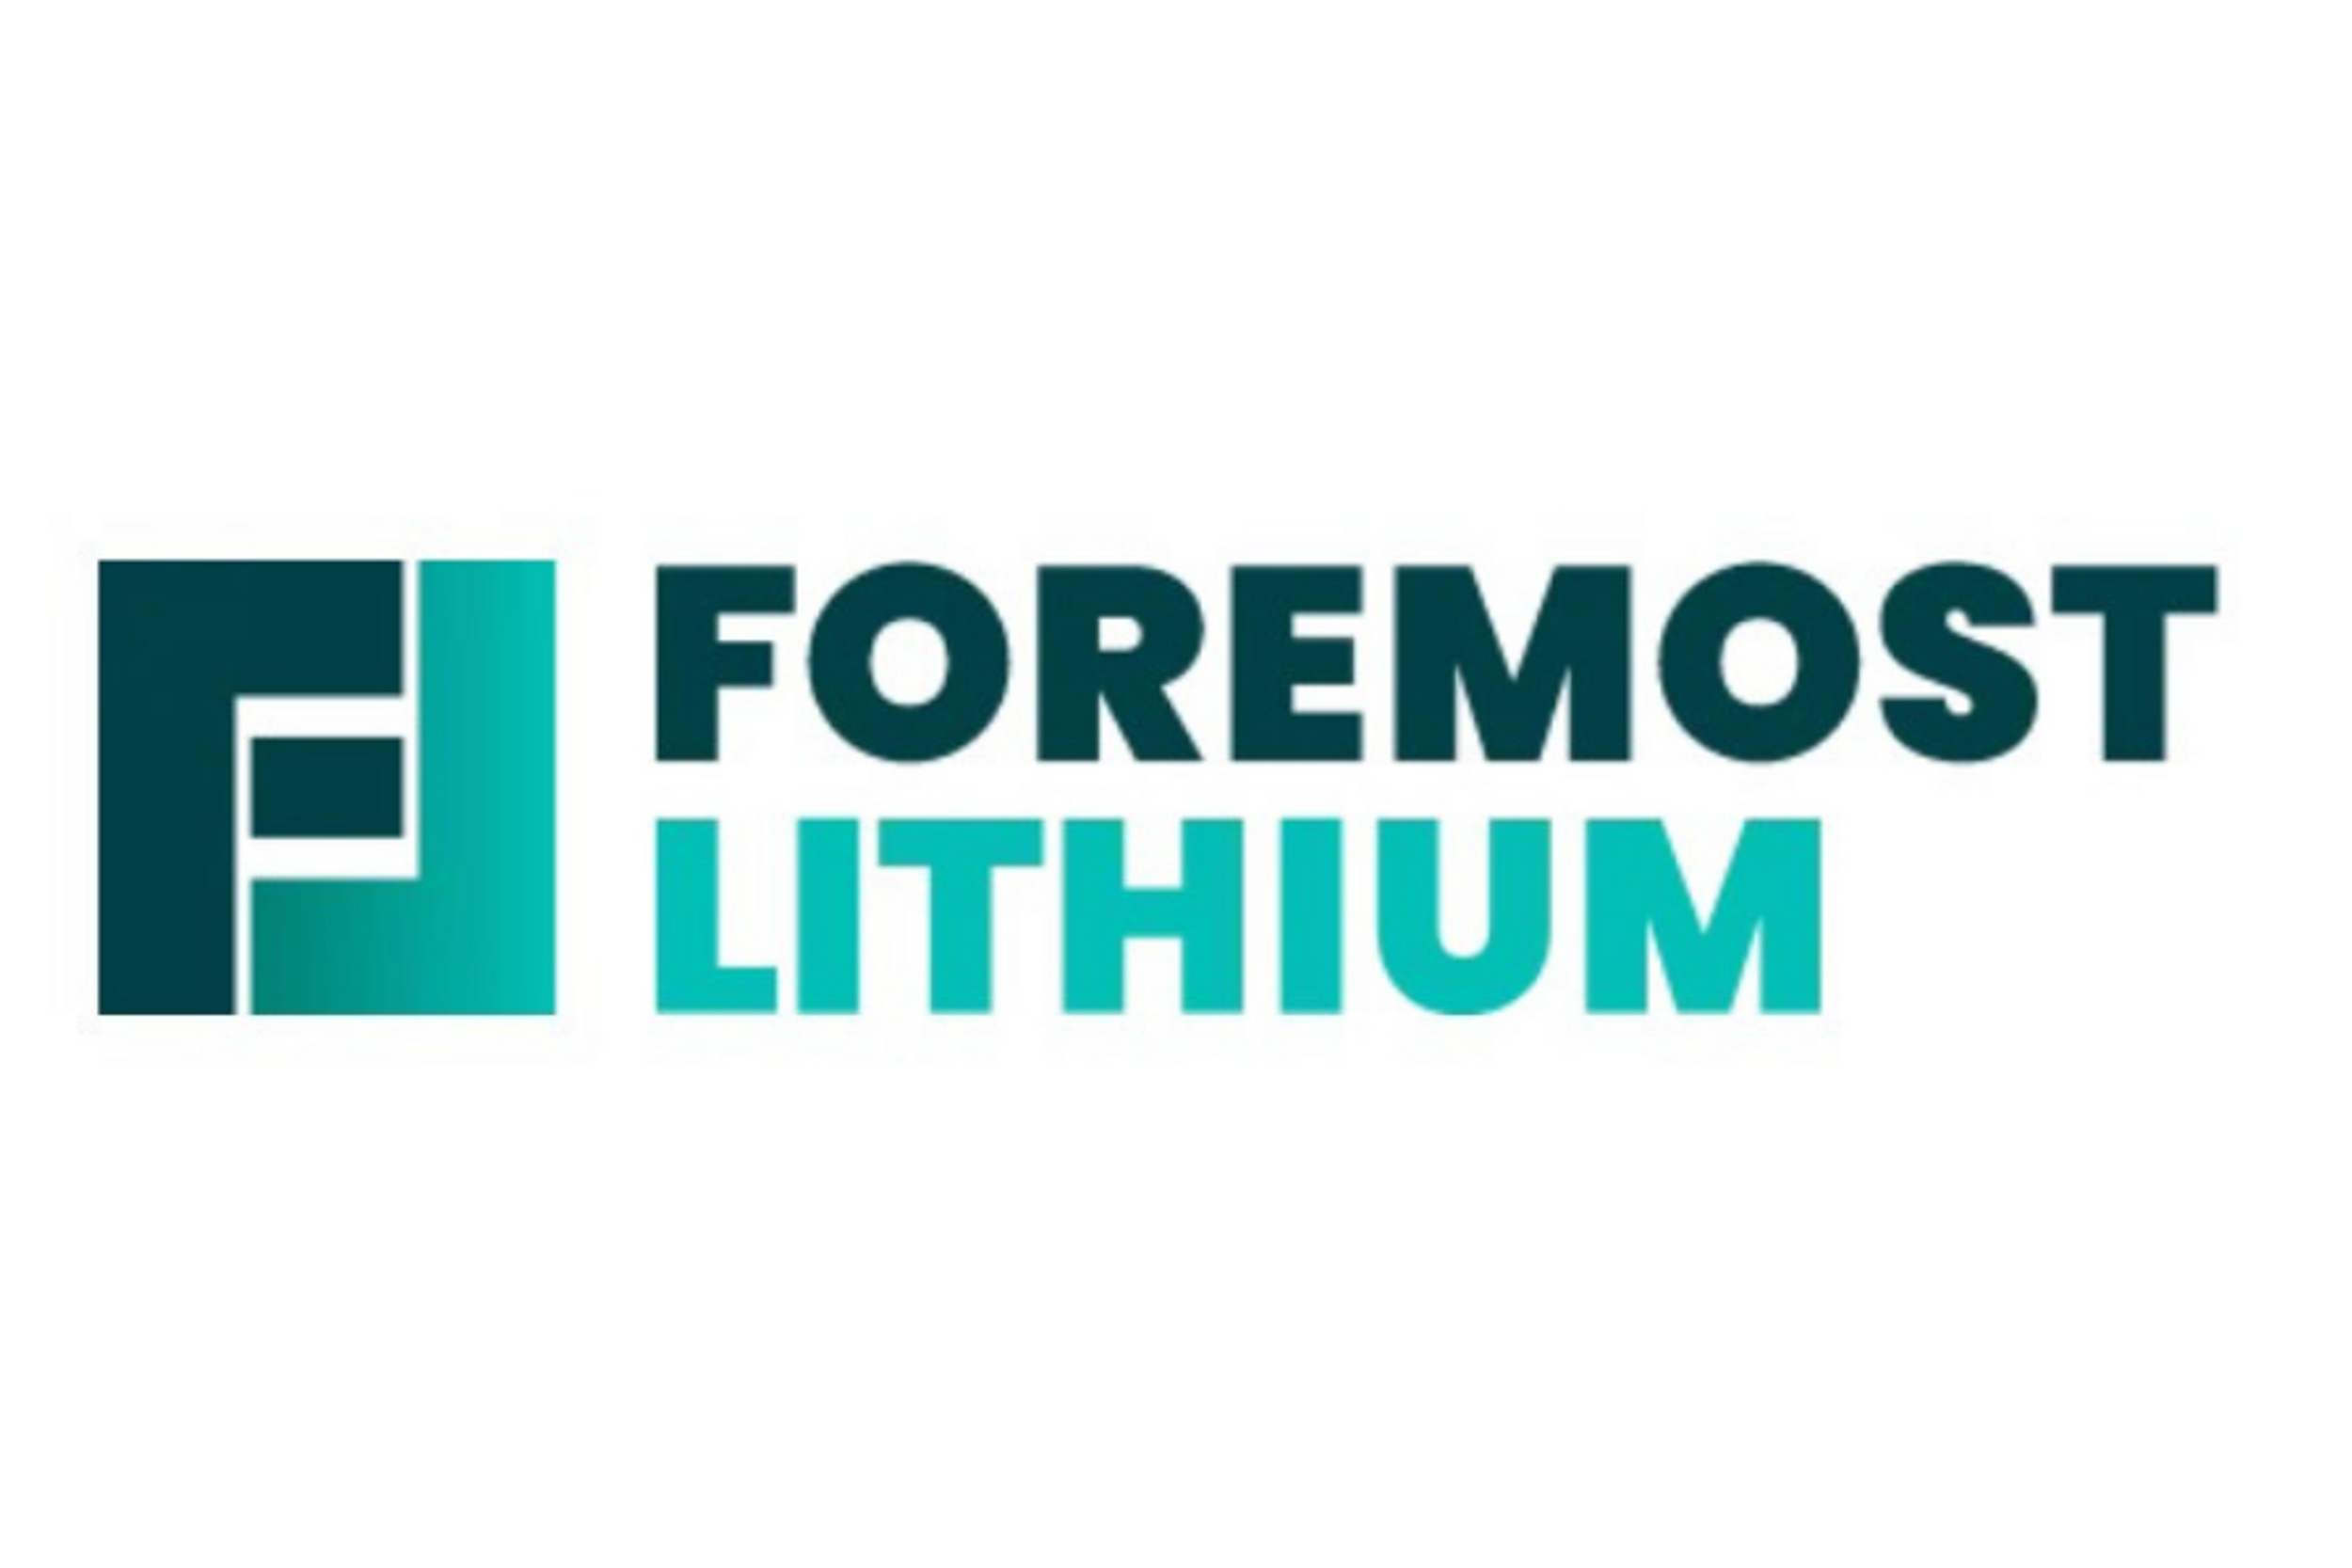 Foremost Lithium Announces C$1,145,000 Shareholder Loan